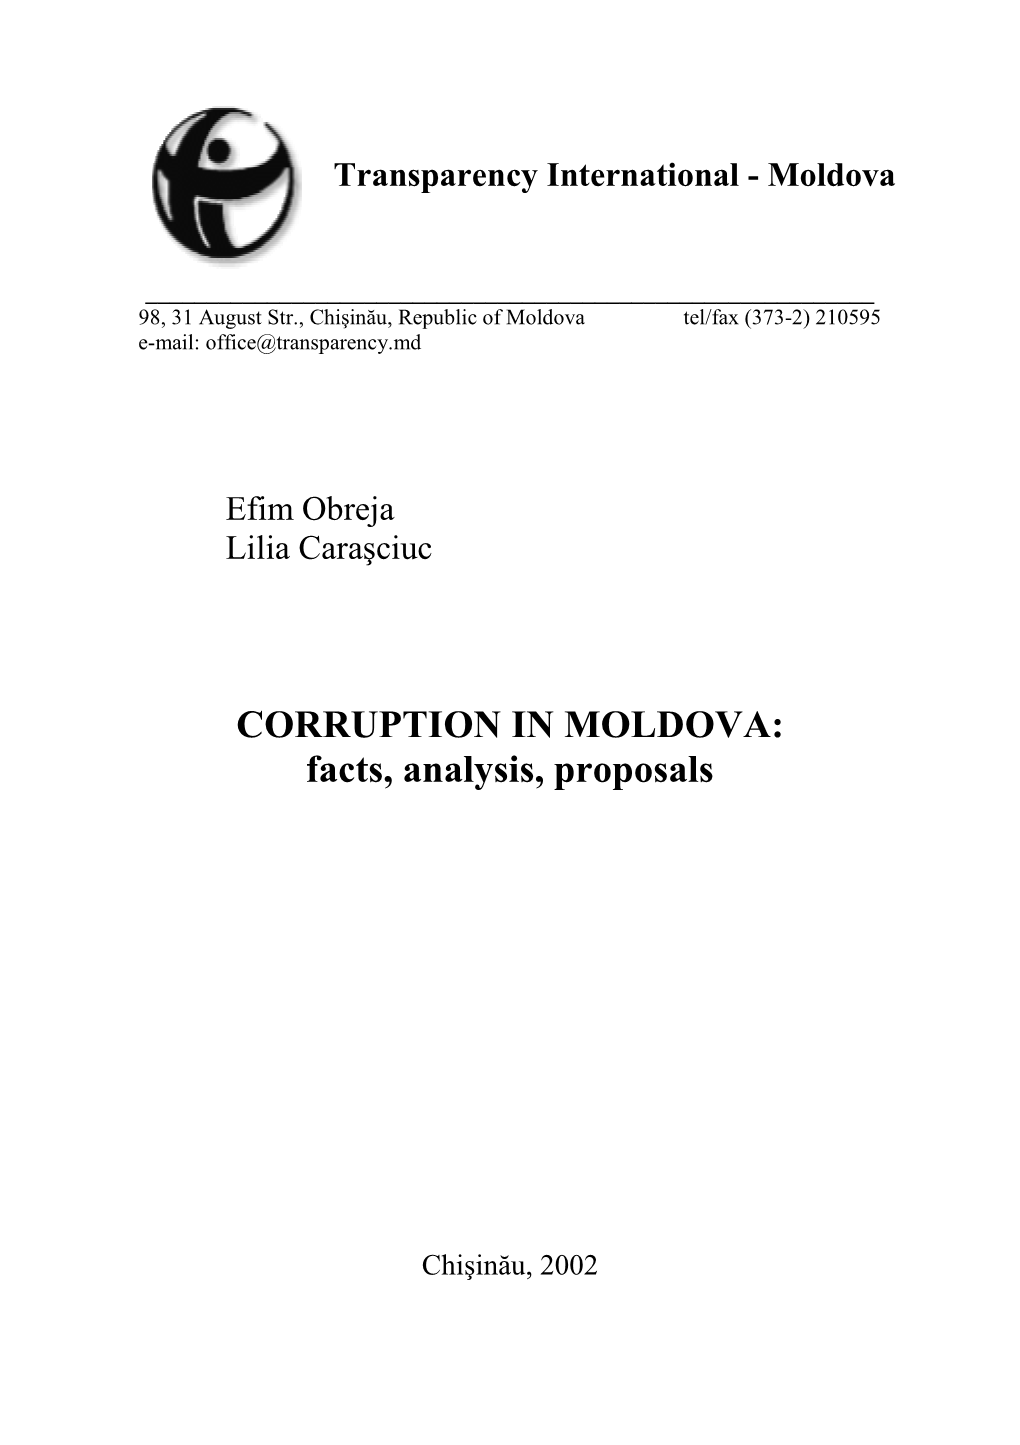 CORRUPTION in MOLDOVA: Facts, Analysis, Proposals